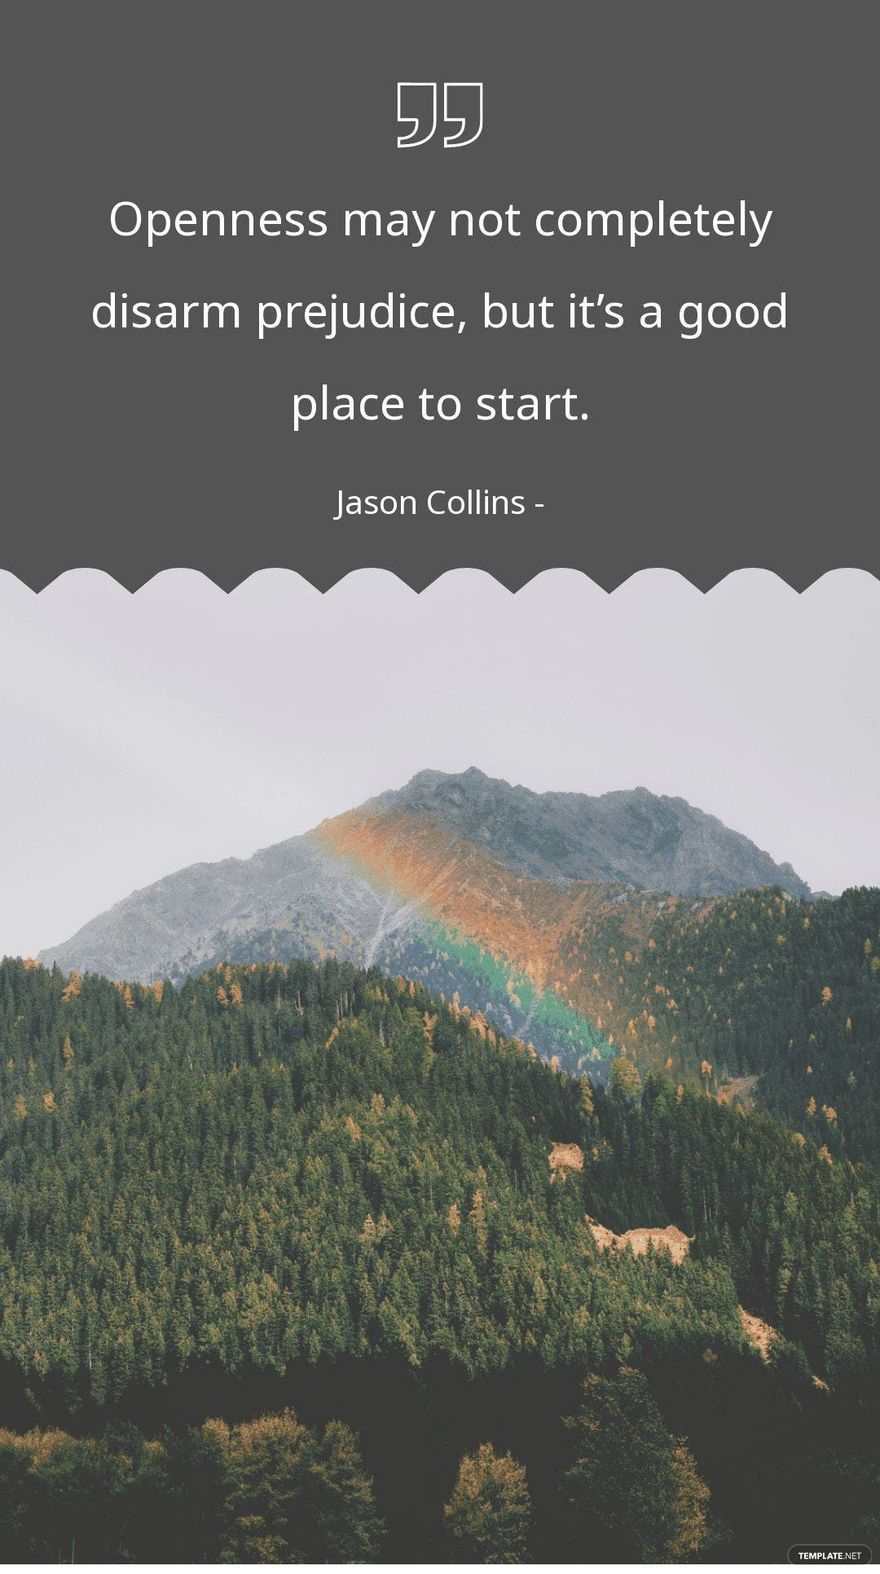 Jason Collins - Openness may not completely disarm prejudice, but it’s a good place to start.